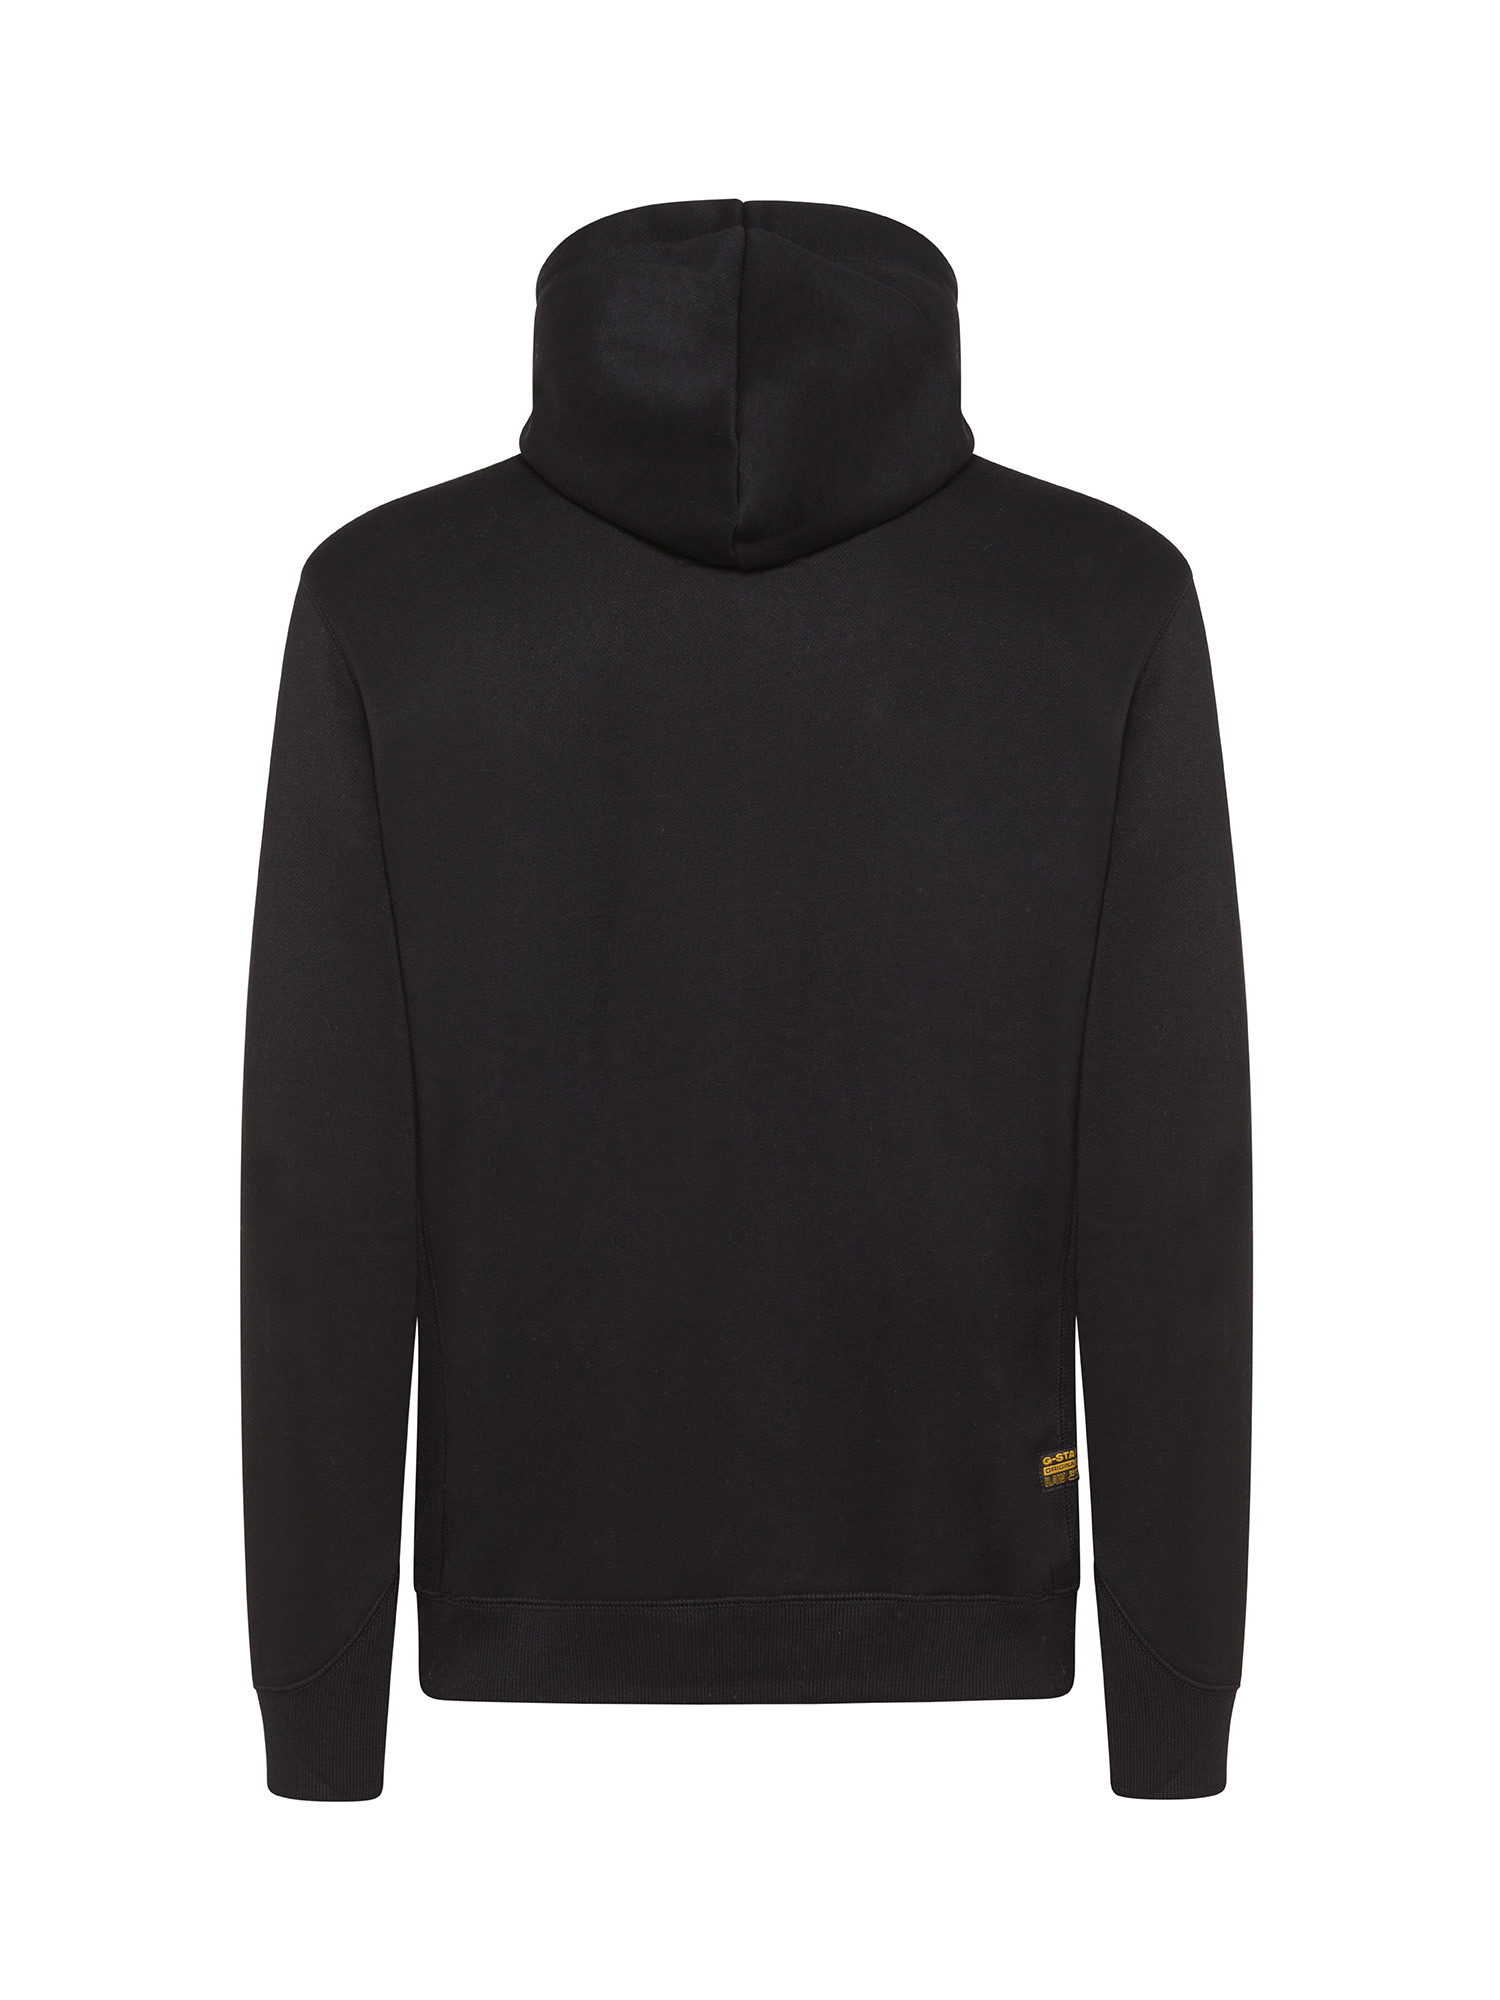 G-Star - Full zip sweatshirt with logo embroidery, Black, large image number 1